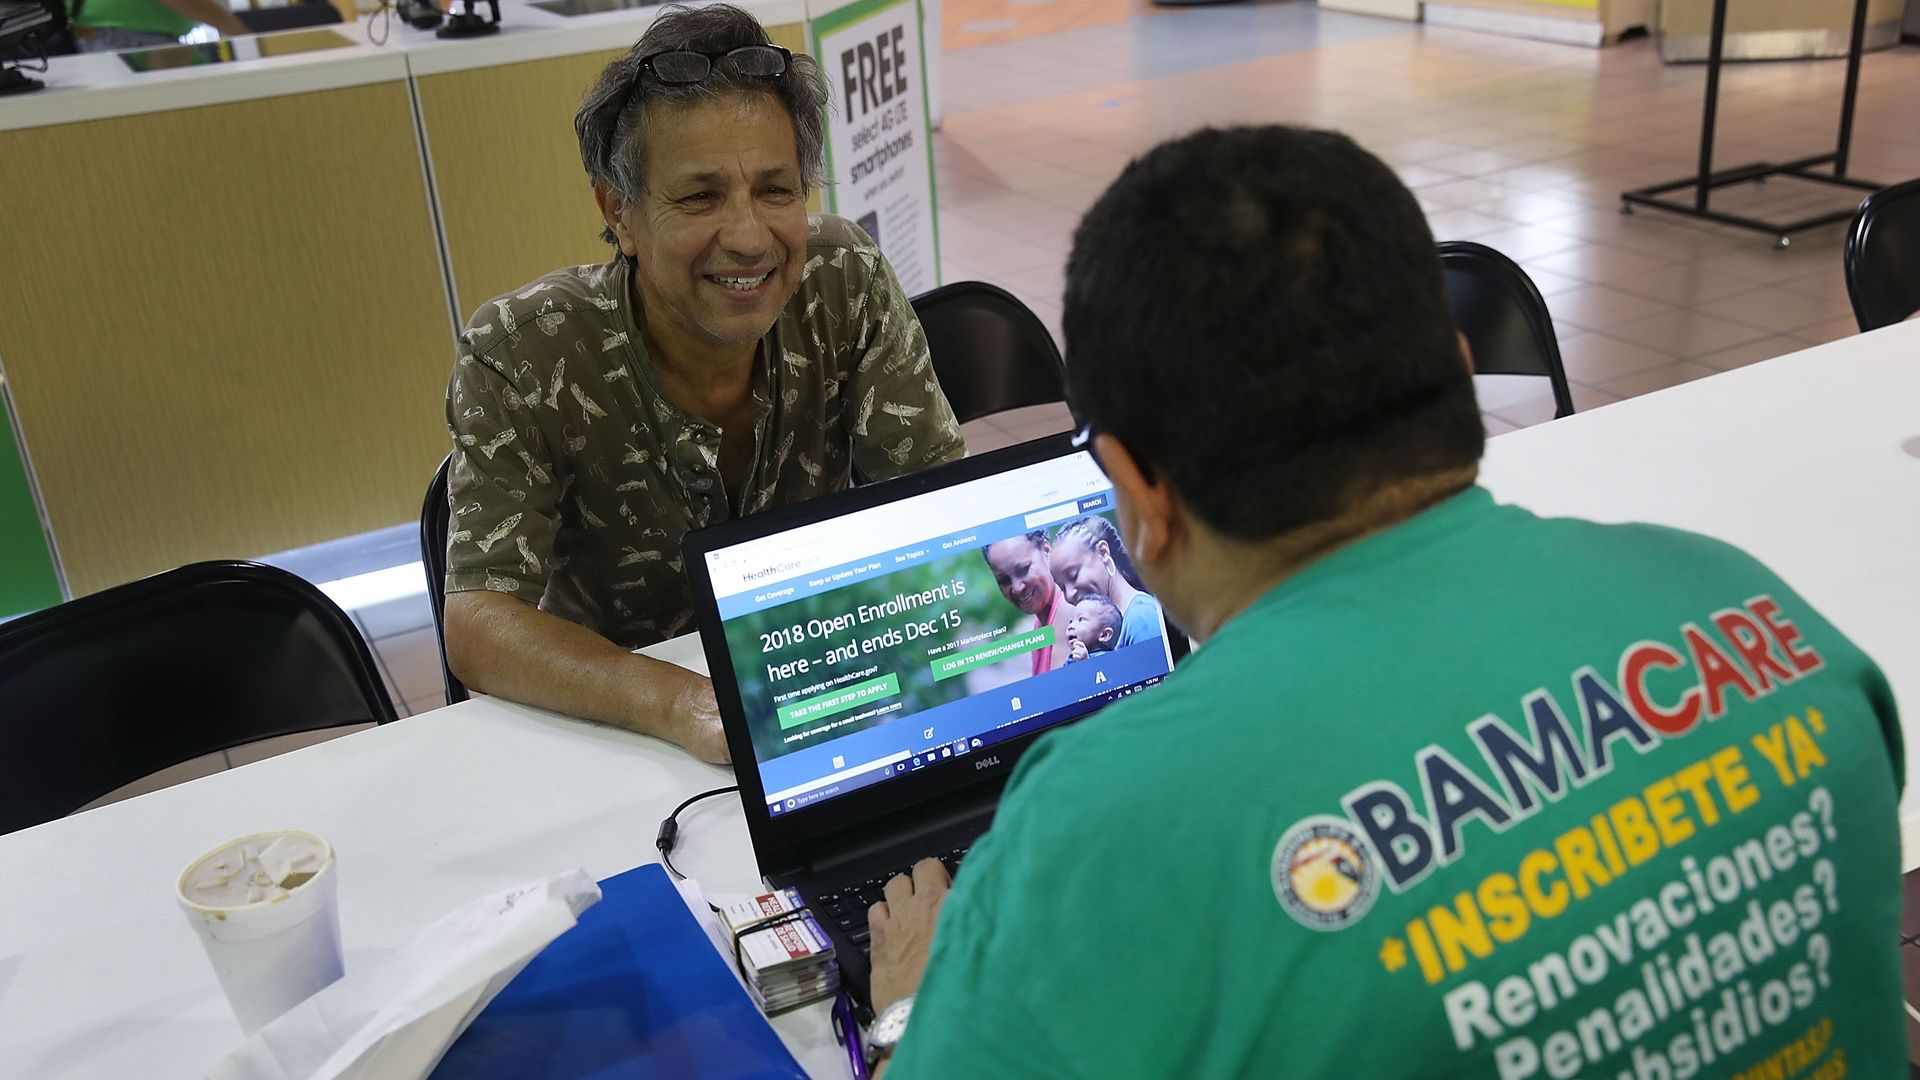 A man signs up for health coverage at a table with the help of another person at a computer.